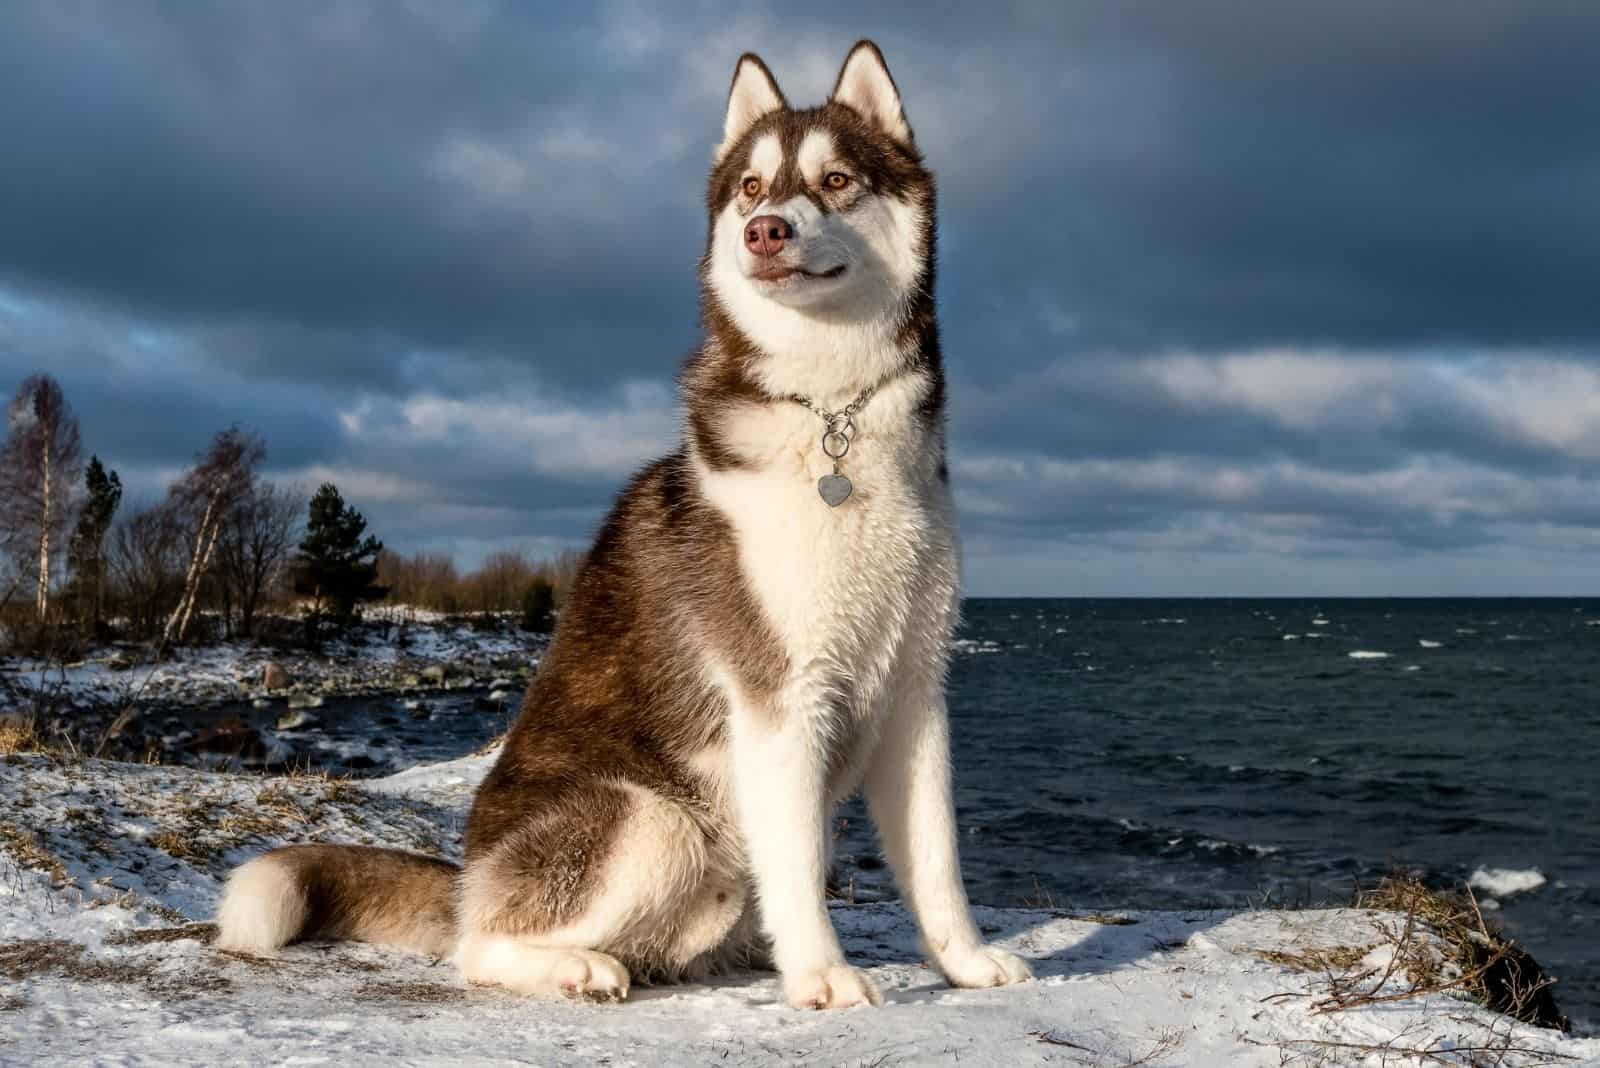 siberian husky dog standing in the snow near the body of water